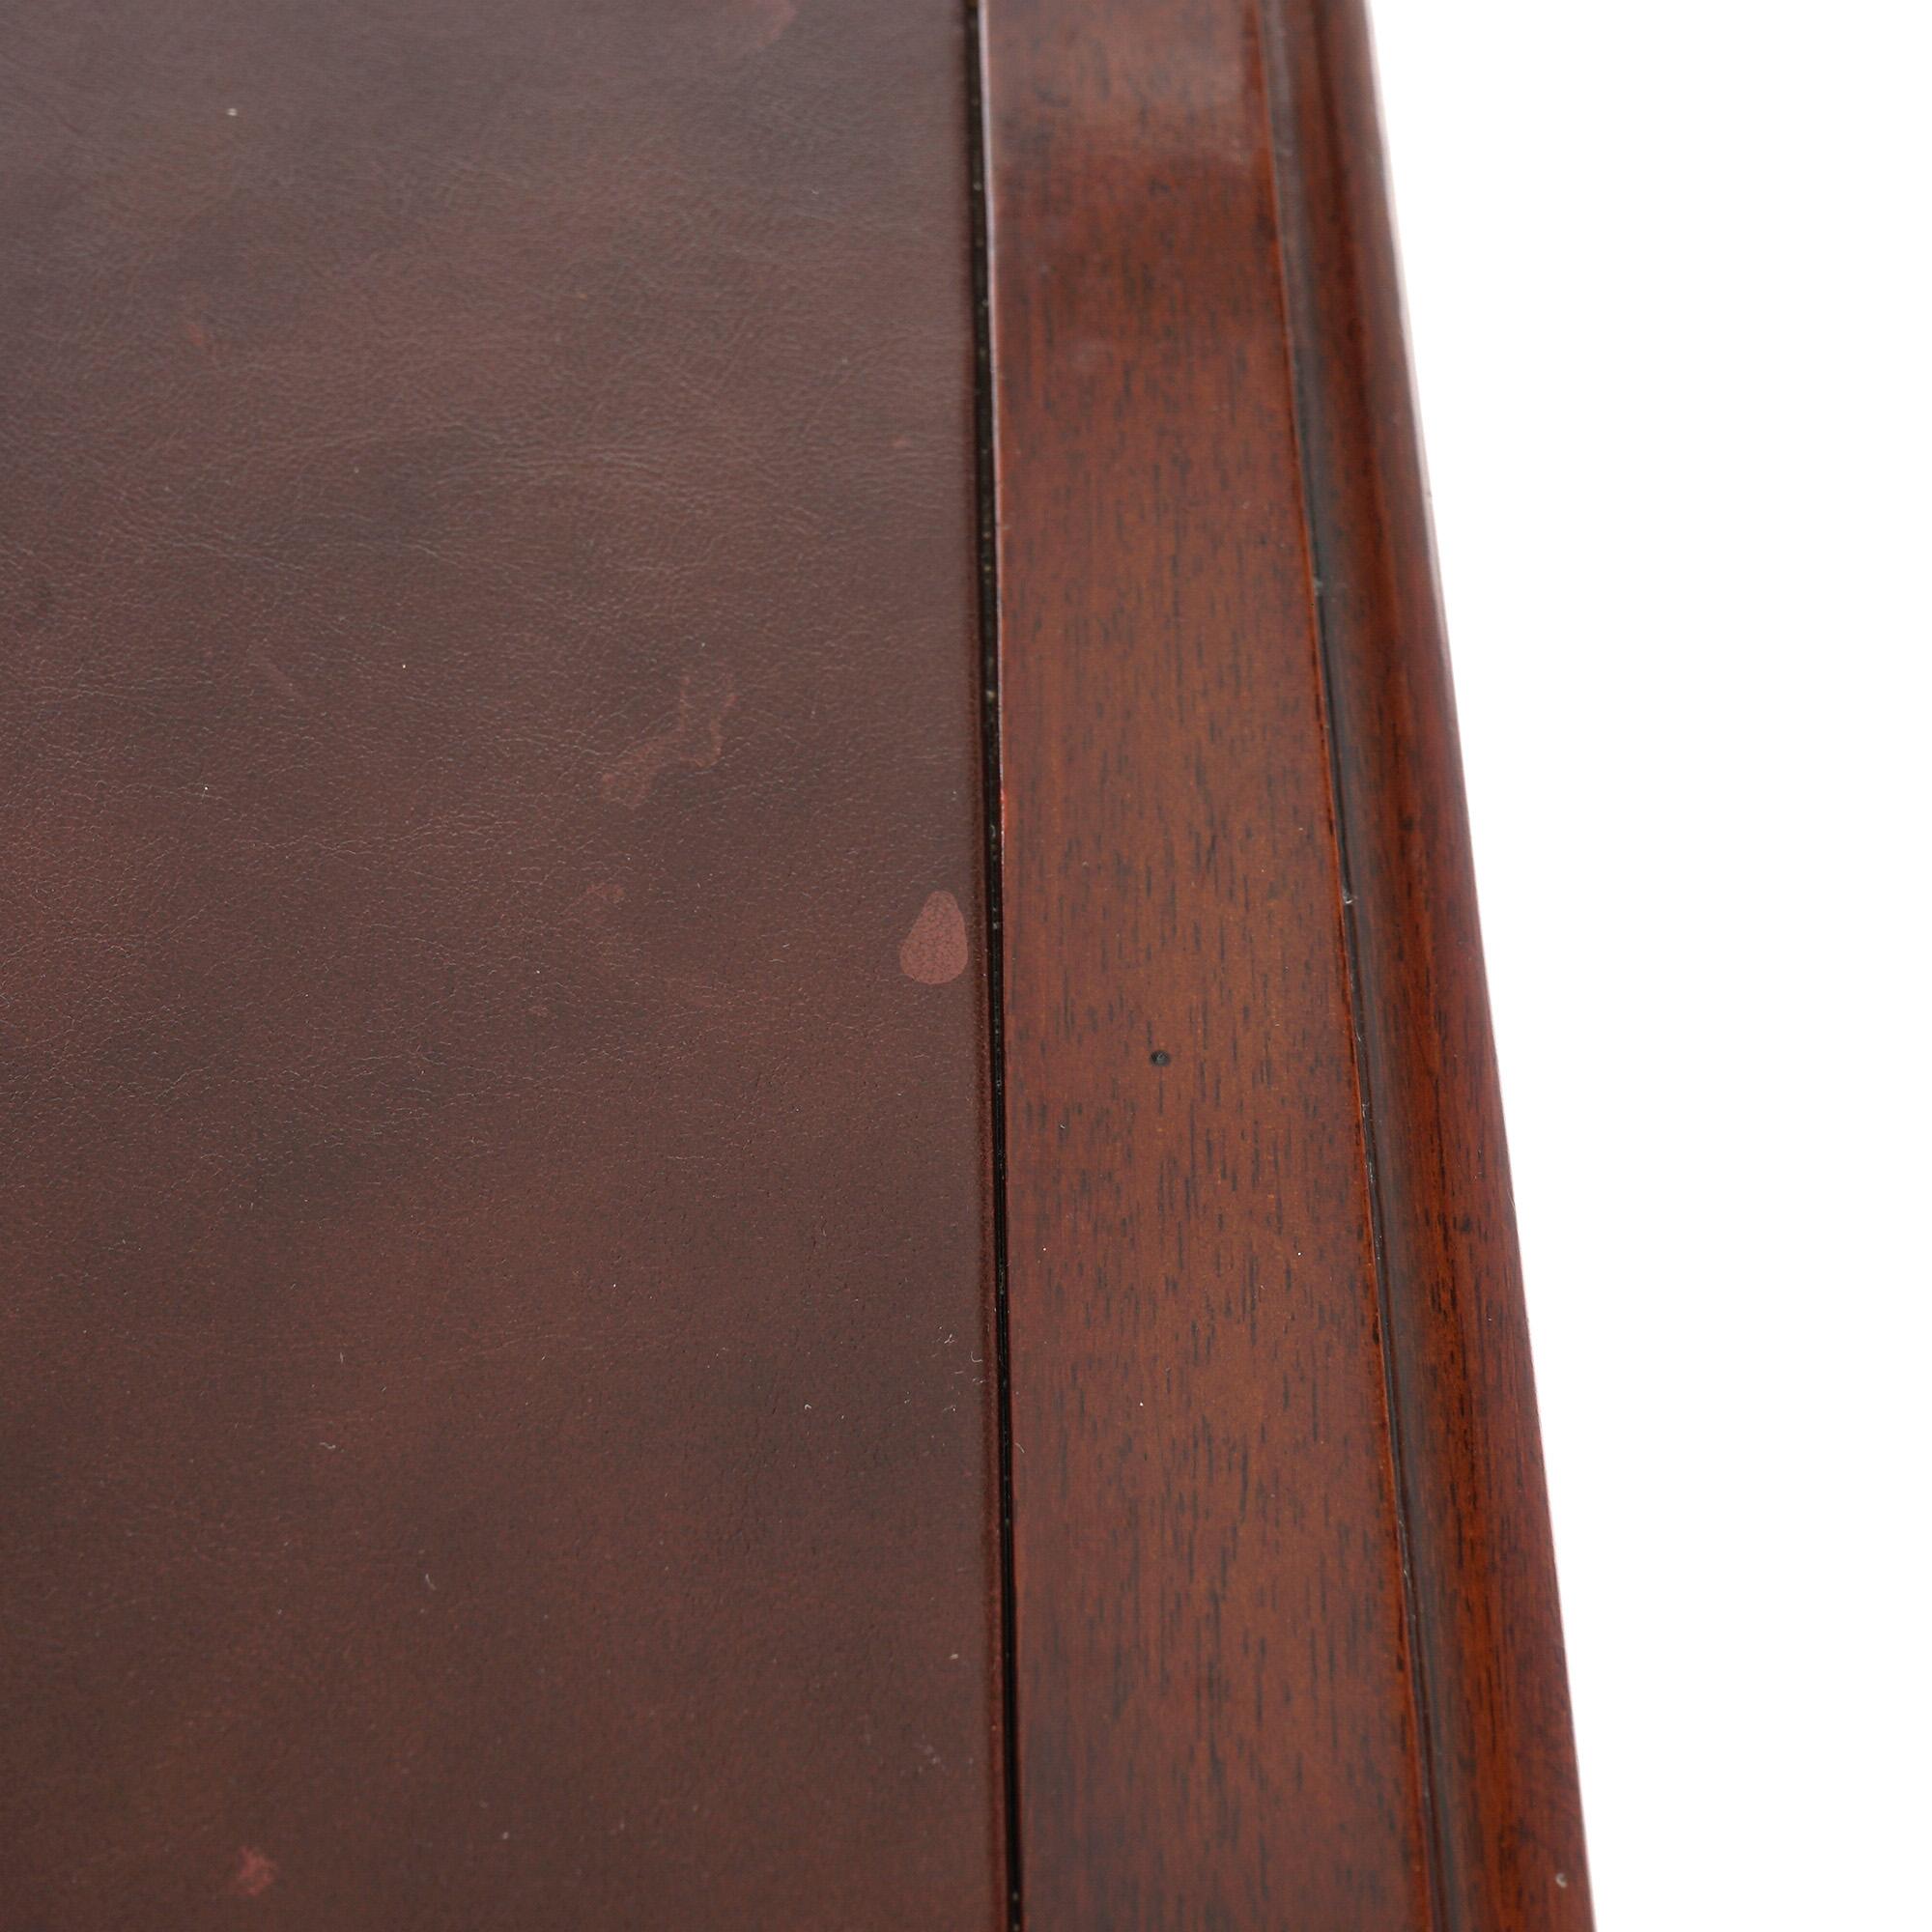 Kittinger Chippendale Style Mahogany Knee Hole Desk with Drawer Towers 20thC For Sale 5